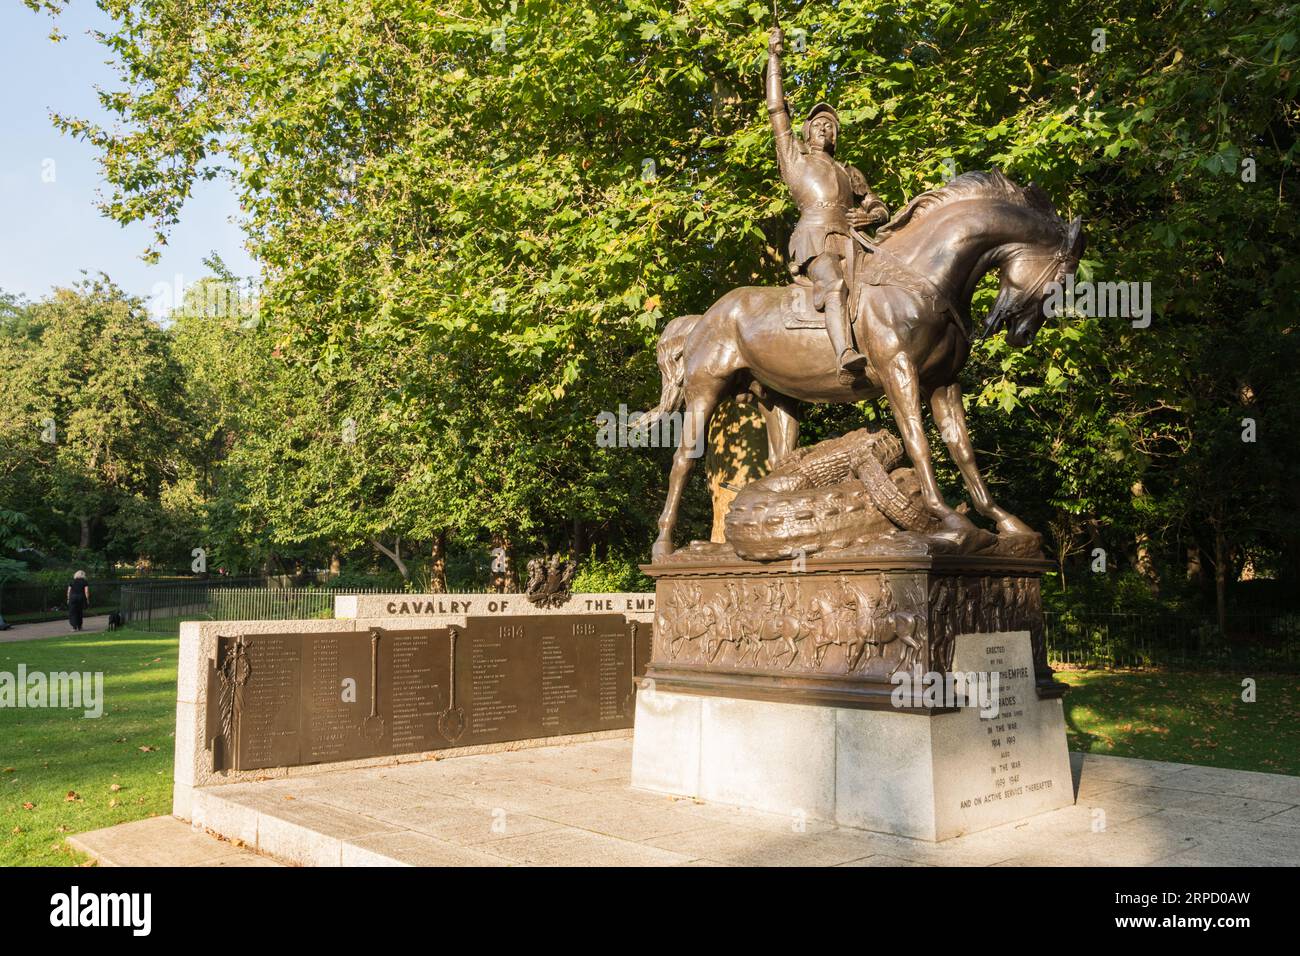 The Cavalry of the Empire Memorial, also known as the Cavalry Memorial, is a war memorial in Hyde Park, London, W1, England, U.K. Stock Photo